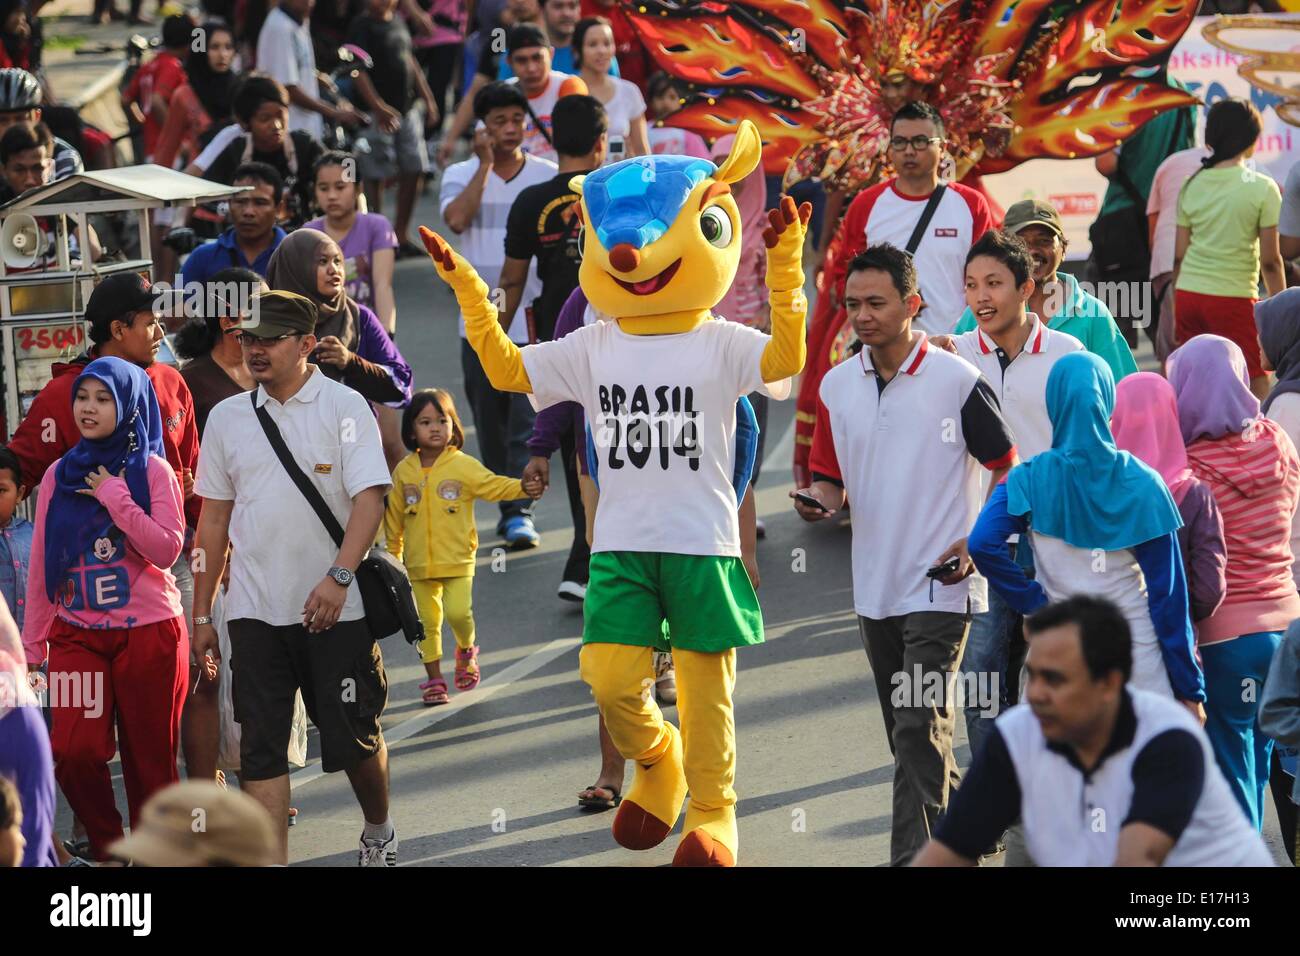 Semarang, Central Java, Indonesia. 25th May, 2014. SEMARANG, CENTRAL JAVA, INDONESIA - MAY 25: Armadillo, the 2014 World Cup mascot, walk to welcome the 2014 FIFA World Cup, International men's football tournament scheduled to take place in Brazil from 12 June to 13 July 2014, in Semarang, Central Java, Indonesia on May 25, 2014. Credit:  Sijori Images/ZUMAPRESS.com/Alamy Live News Stock Photo